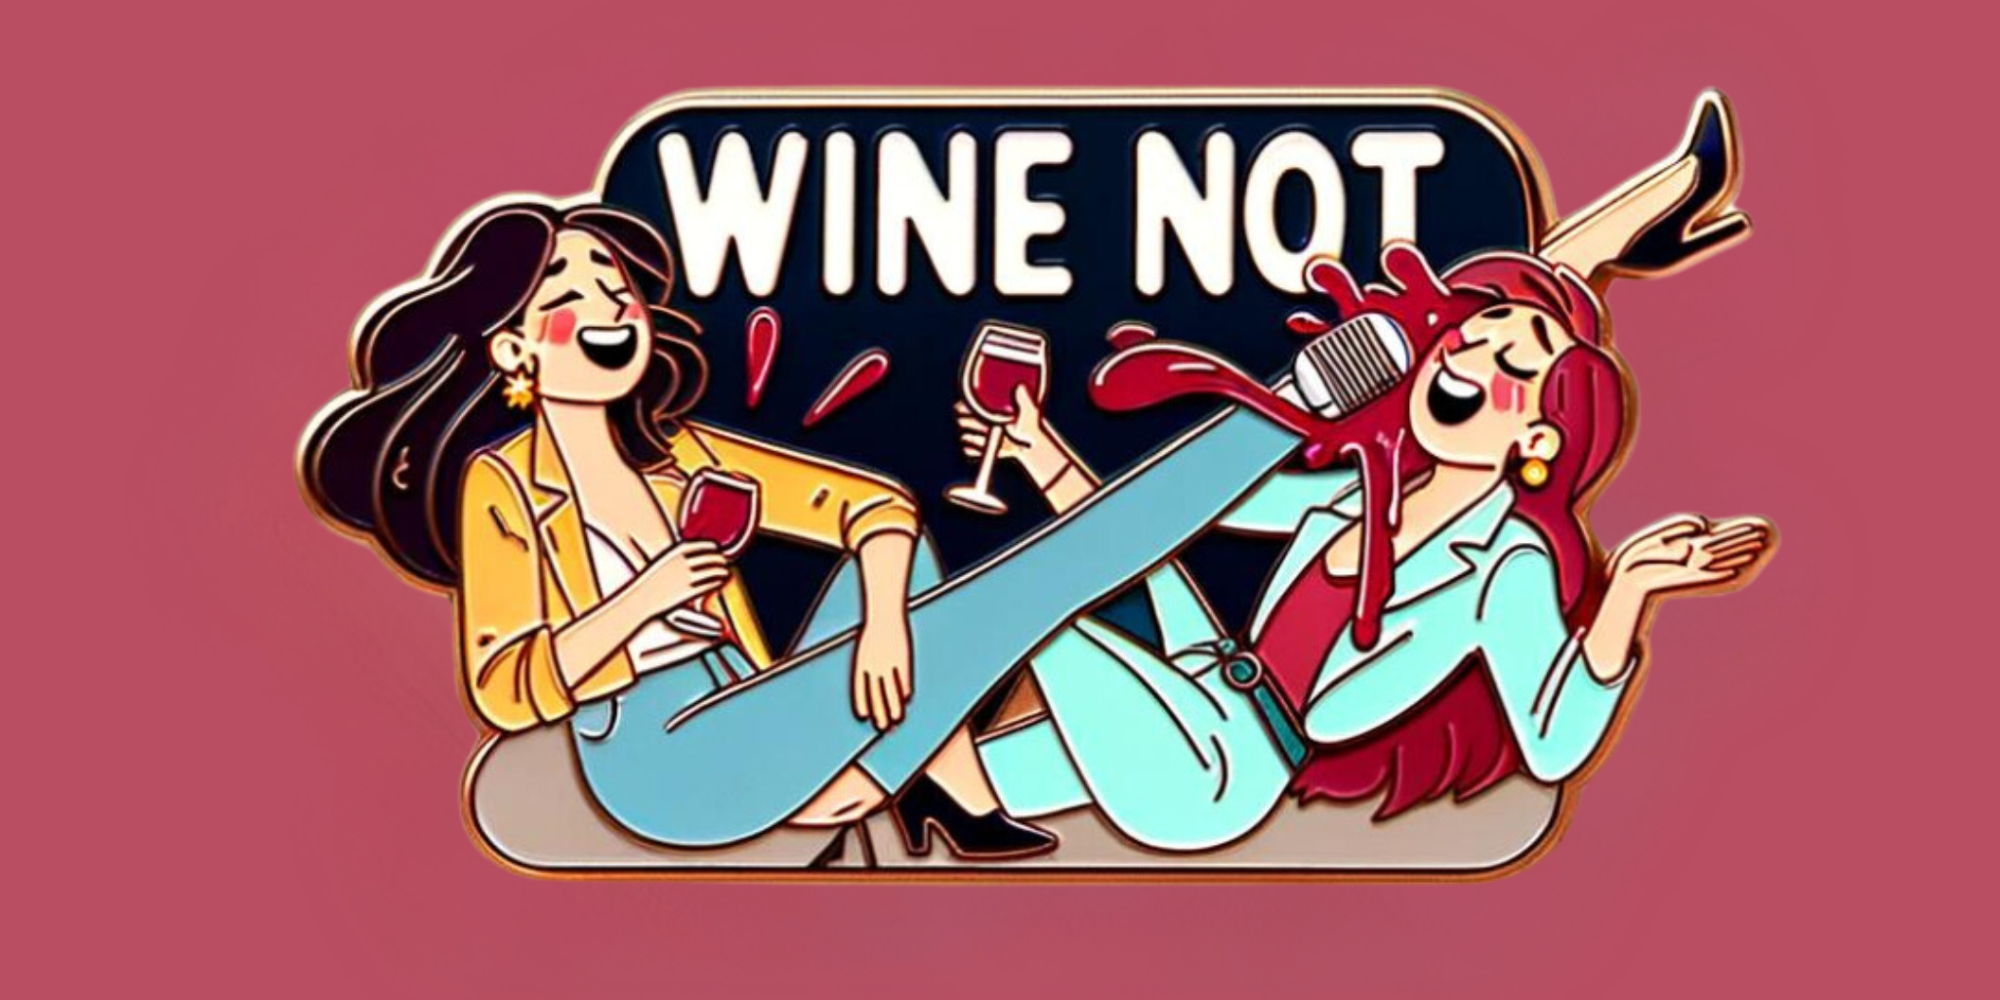 WINE NOT: A standup comedy show at a wine bar promotional image